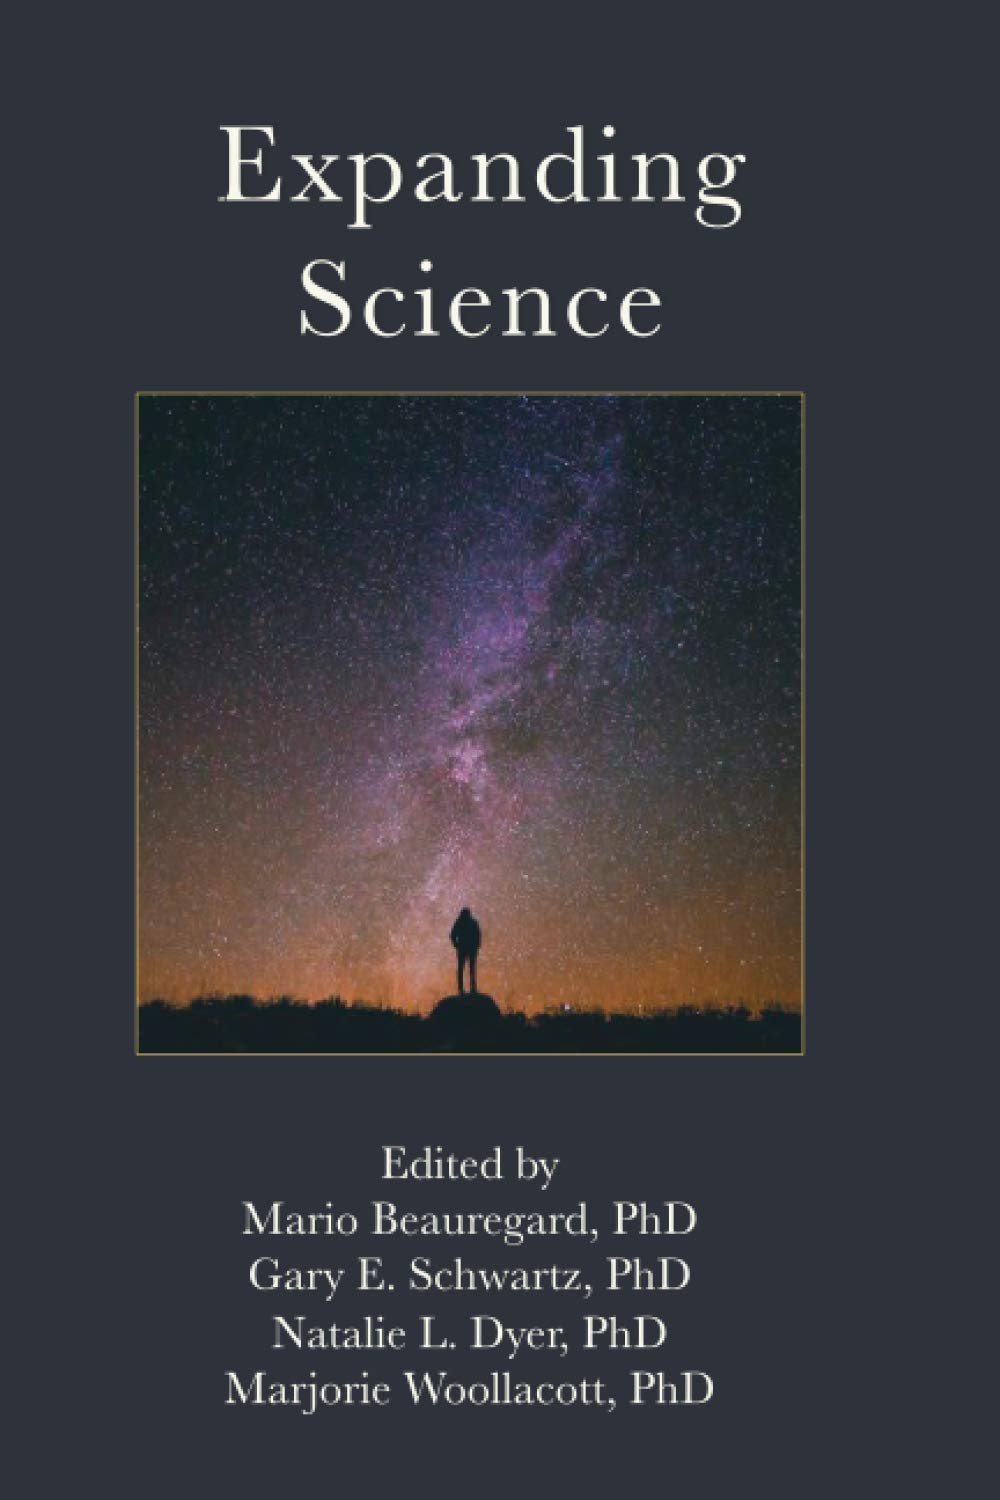 Book cover of "Expanding Science"